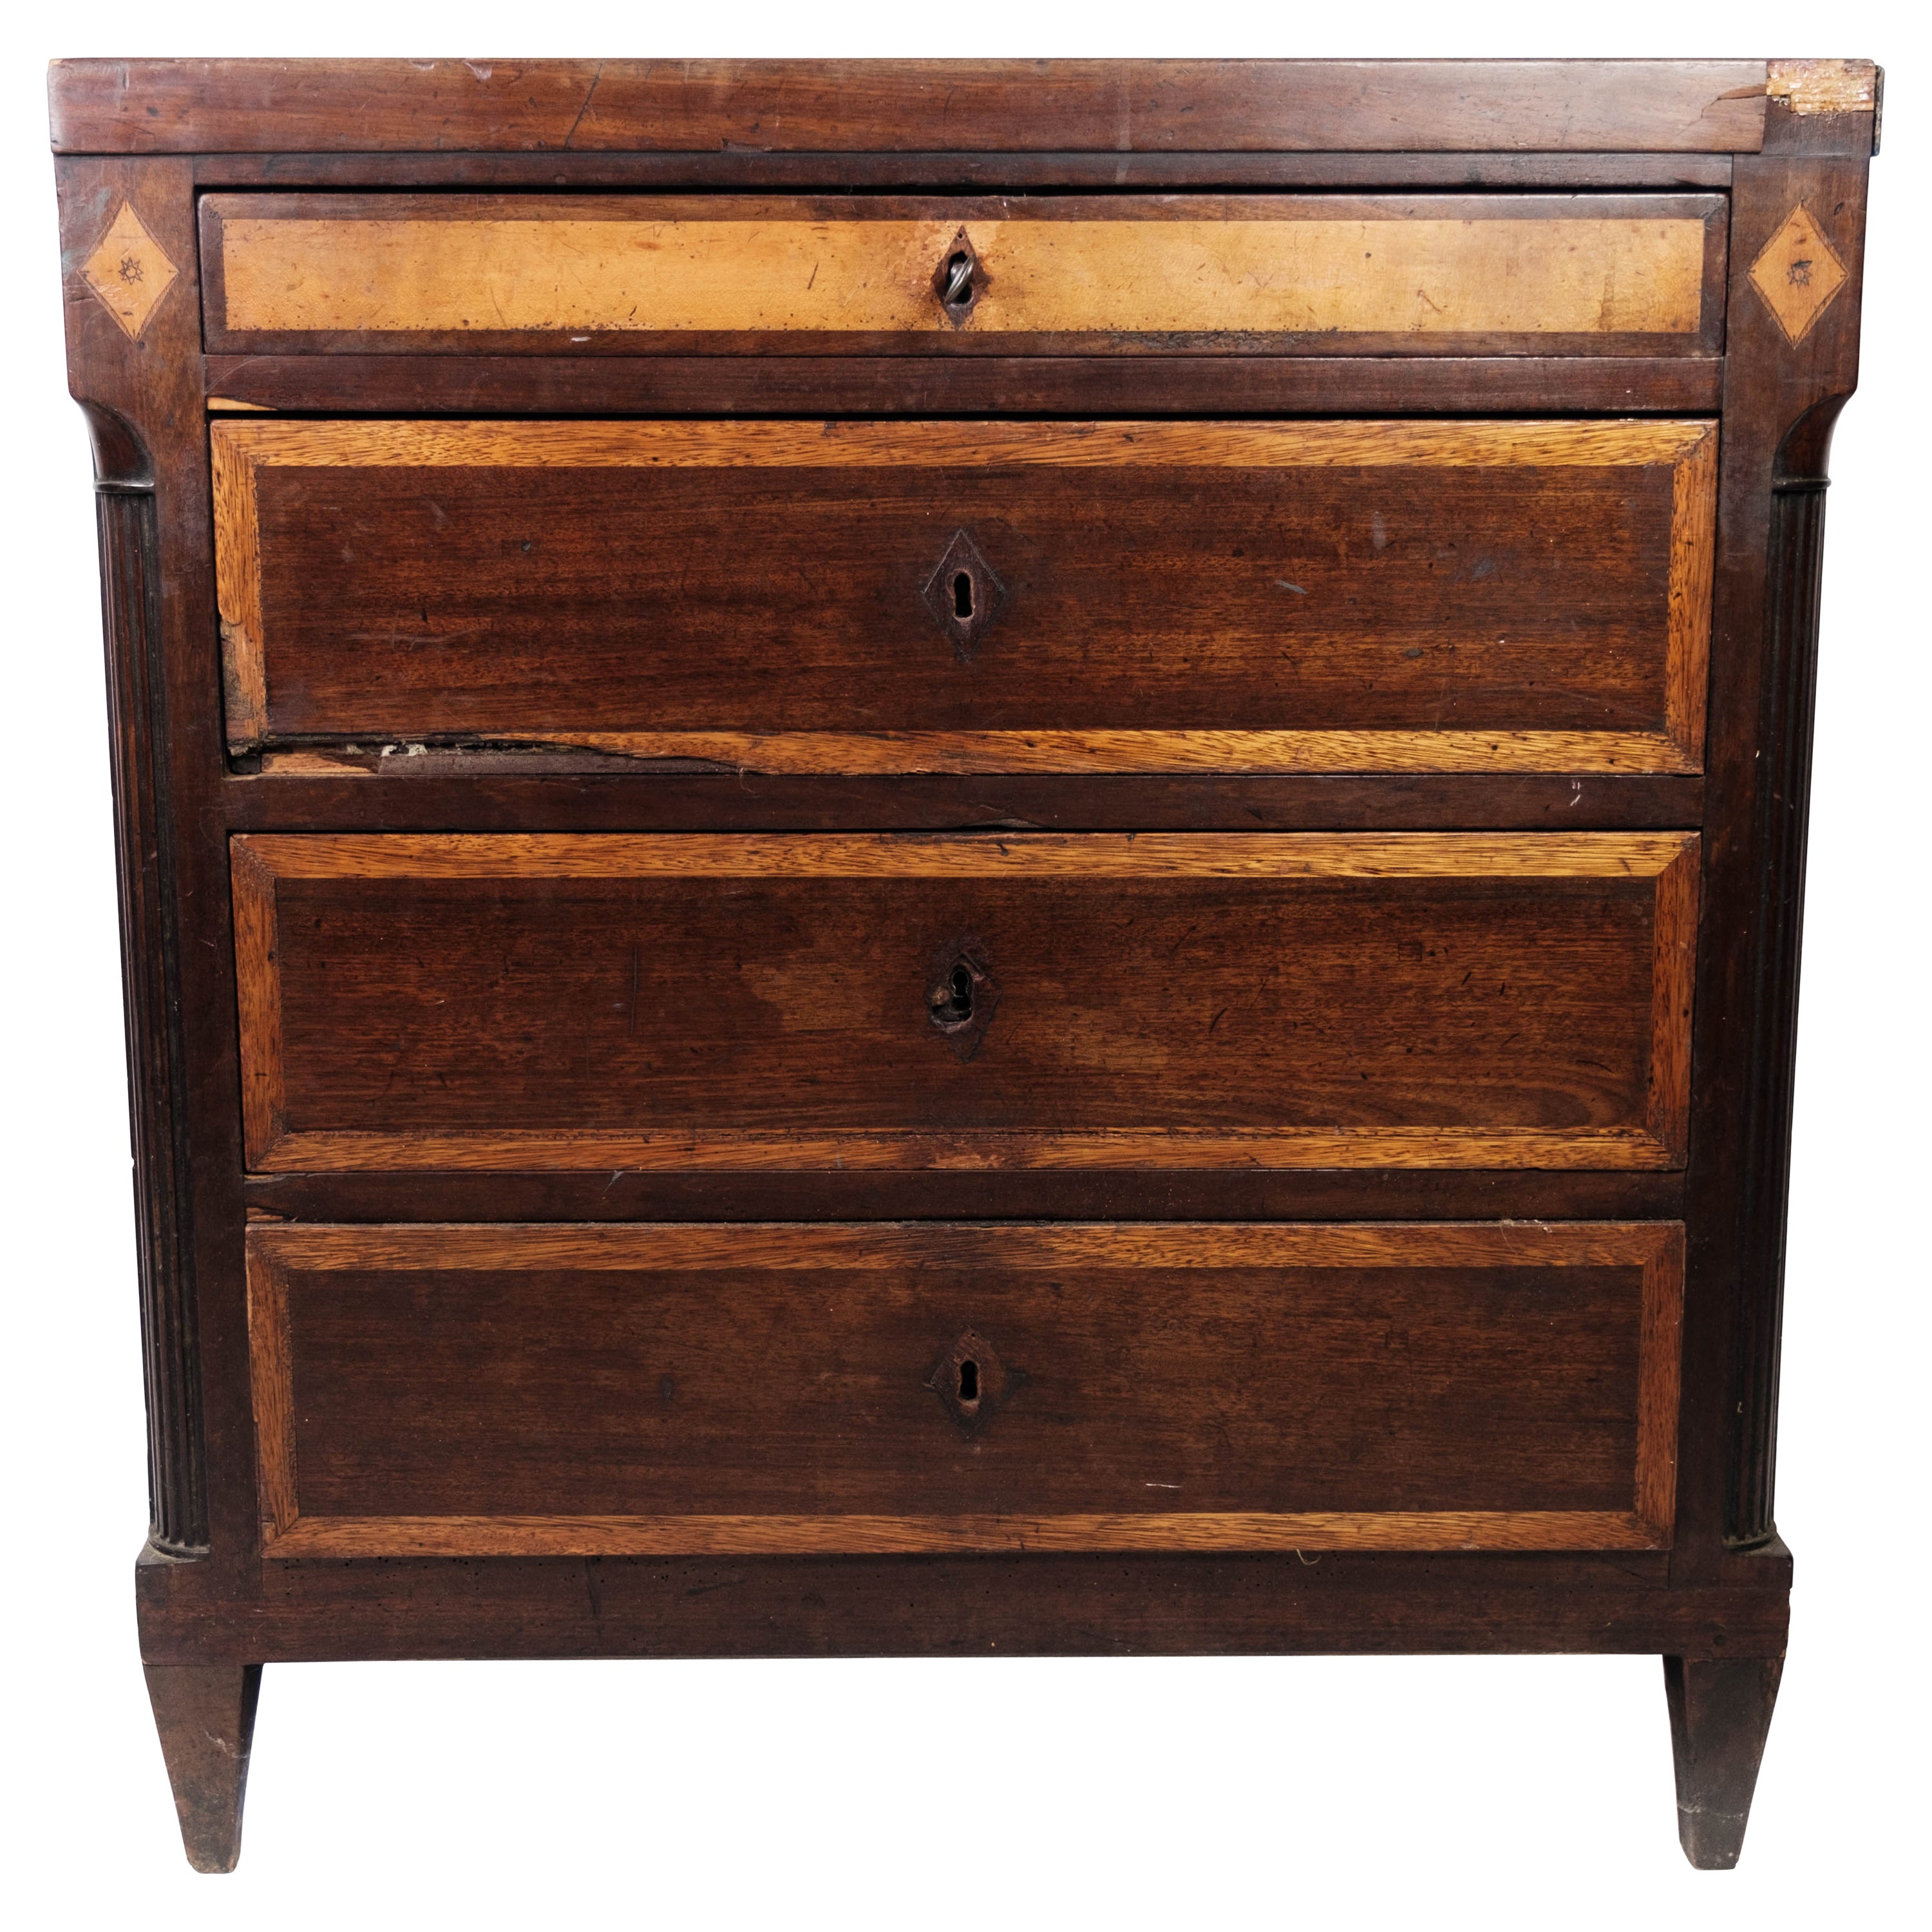 Louis Seize Chest of Drawers Made In Mahogany With Inlaid Wood From 1790s